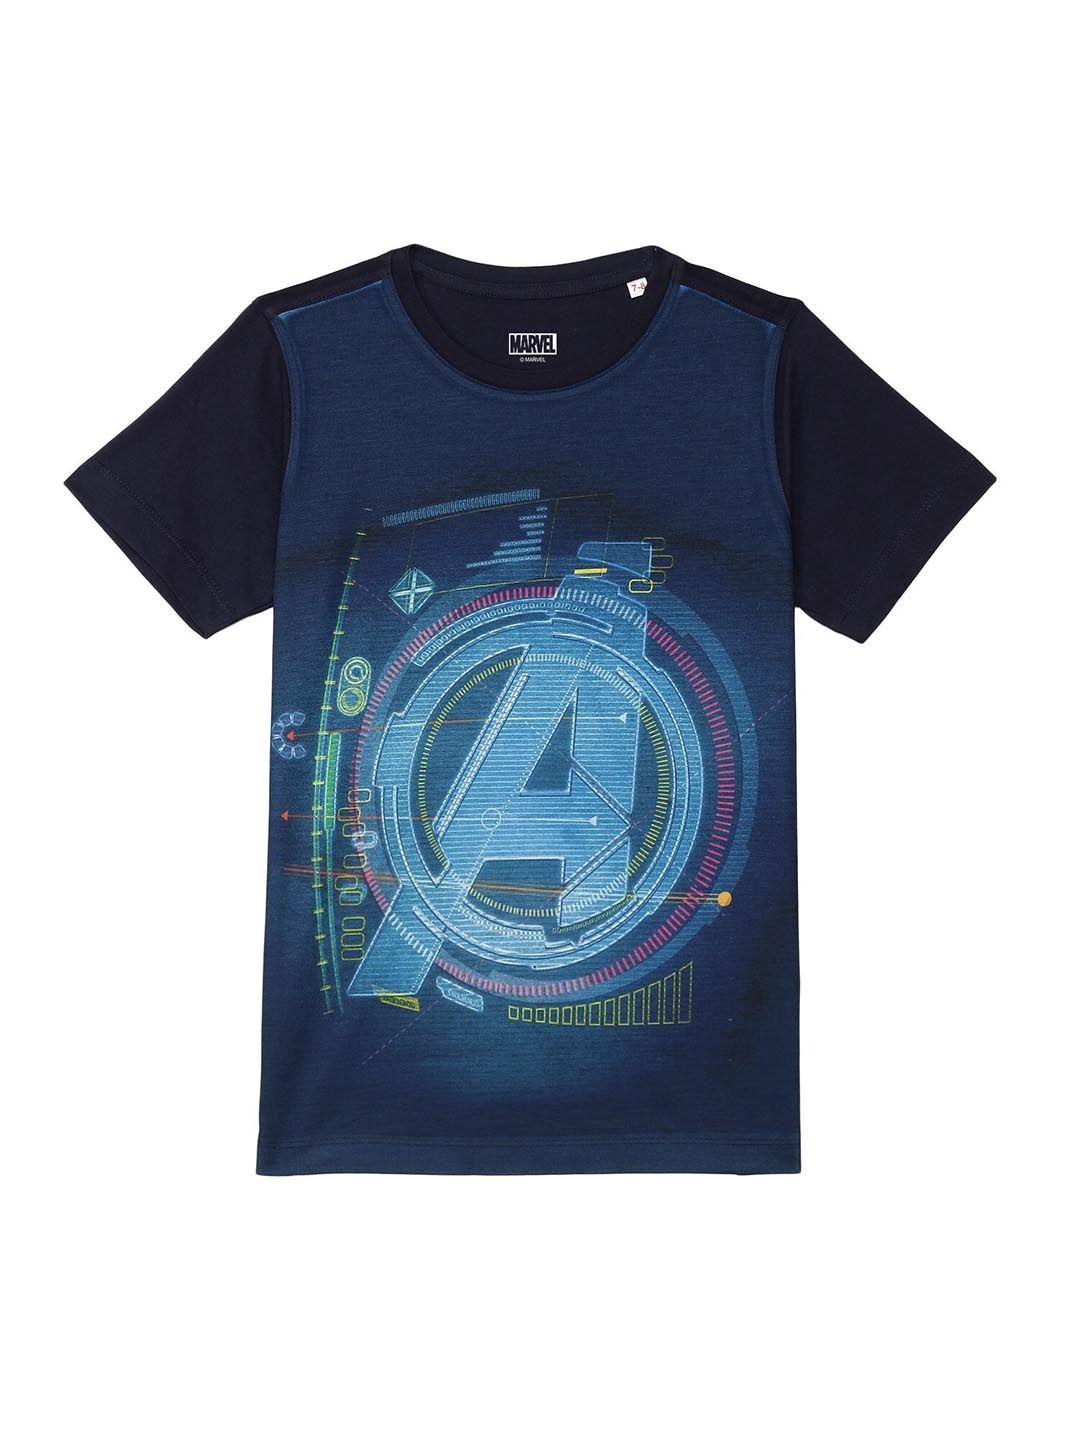 marvel-by-wear-your-mind-boys-navy-blue-avengers-printed-t-shirt